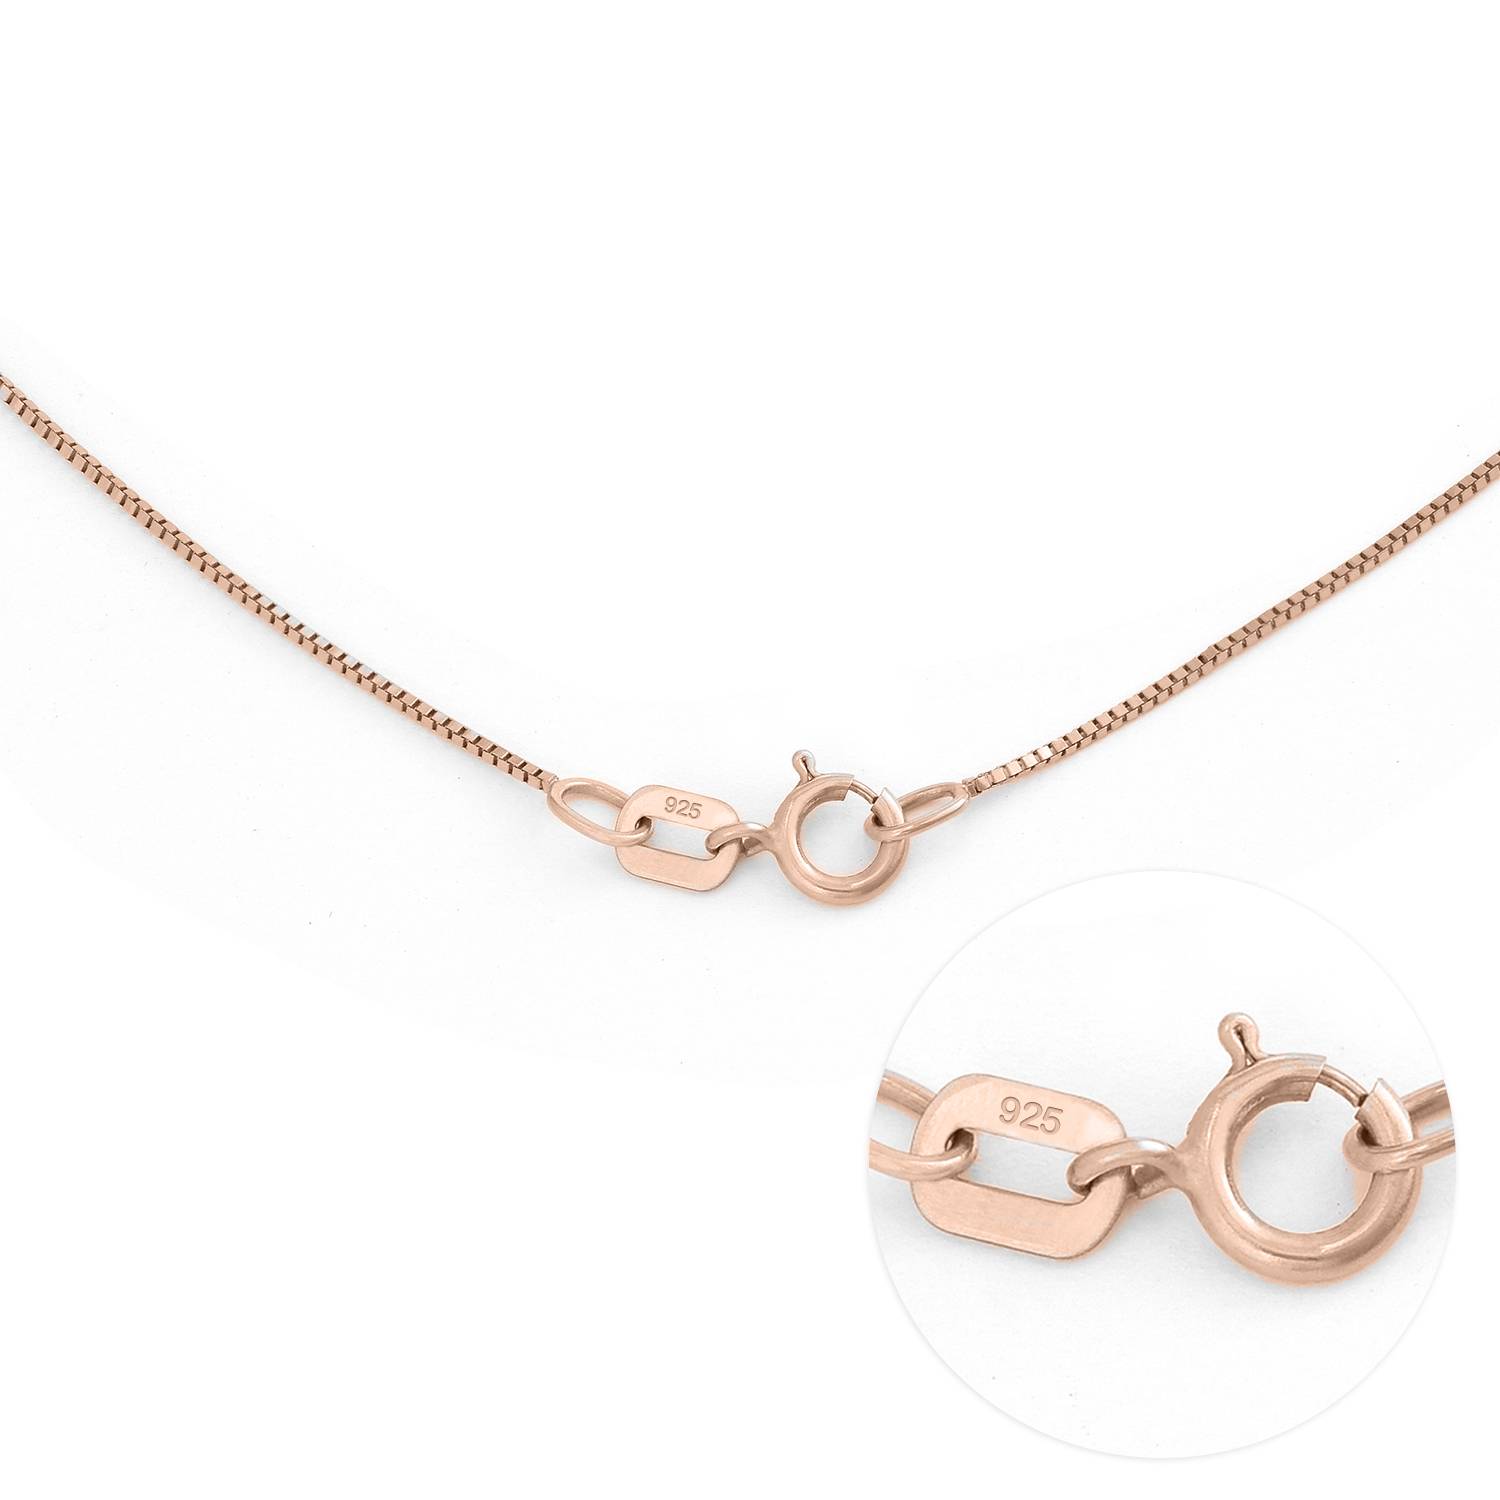 Russian Ring Necklace in 18ct Rose Gold Plating-2 product photo